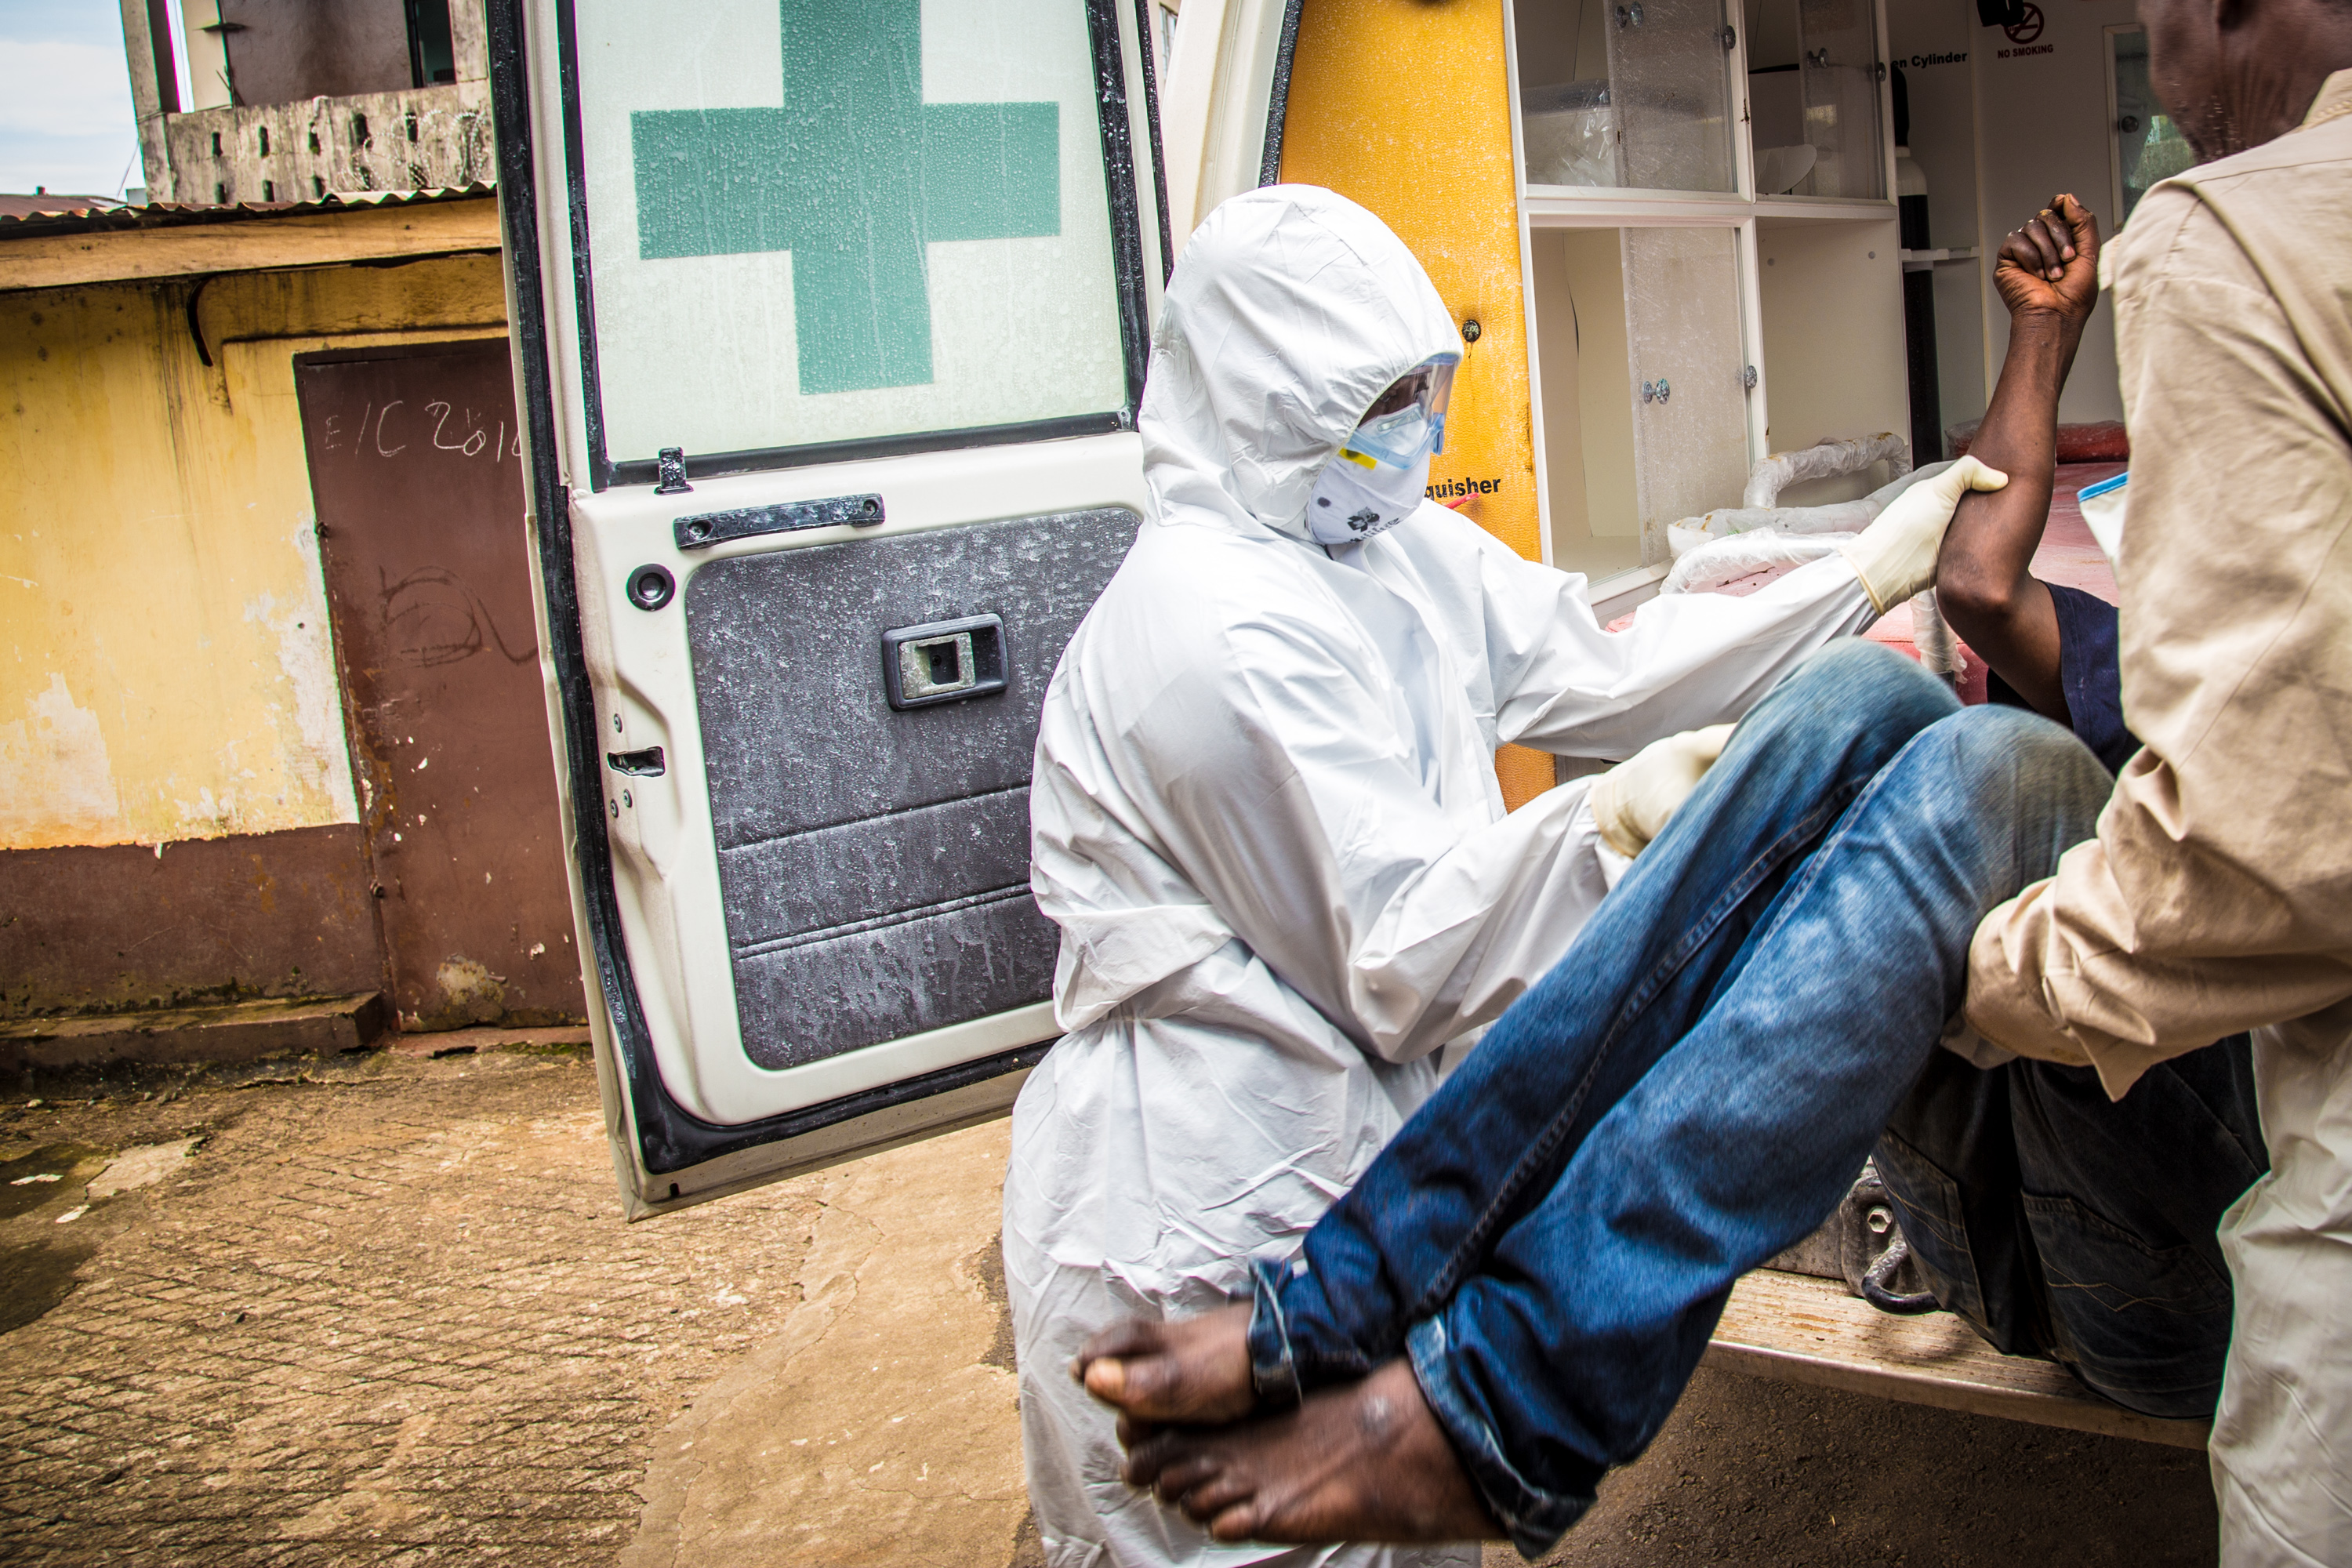 How the World Let the Ebola Epidemic Spiral Out of Control